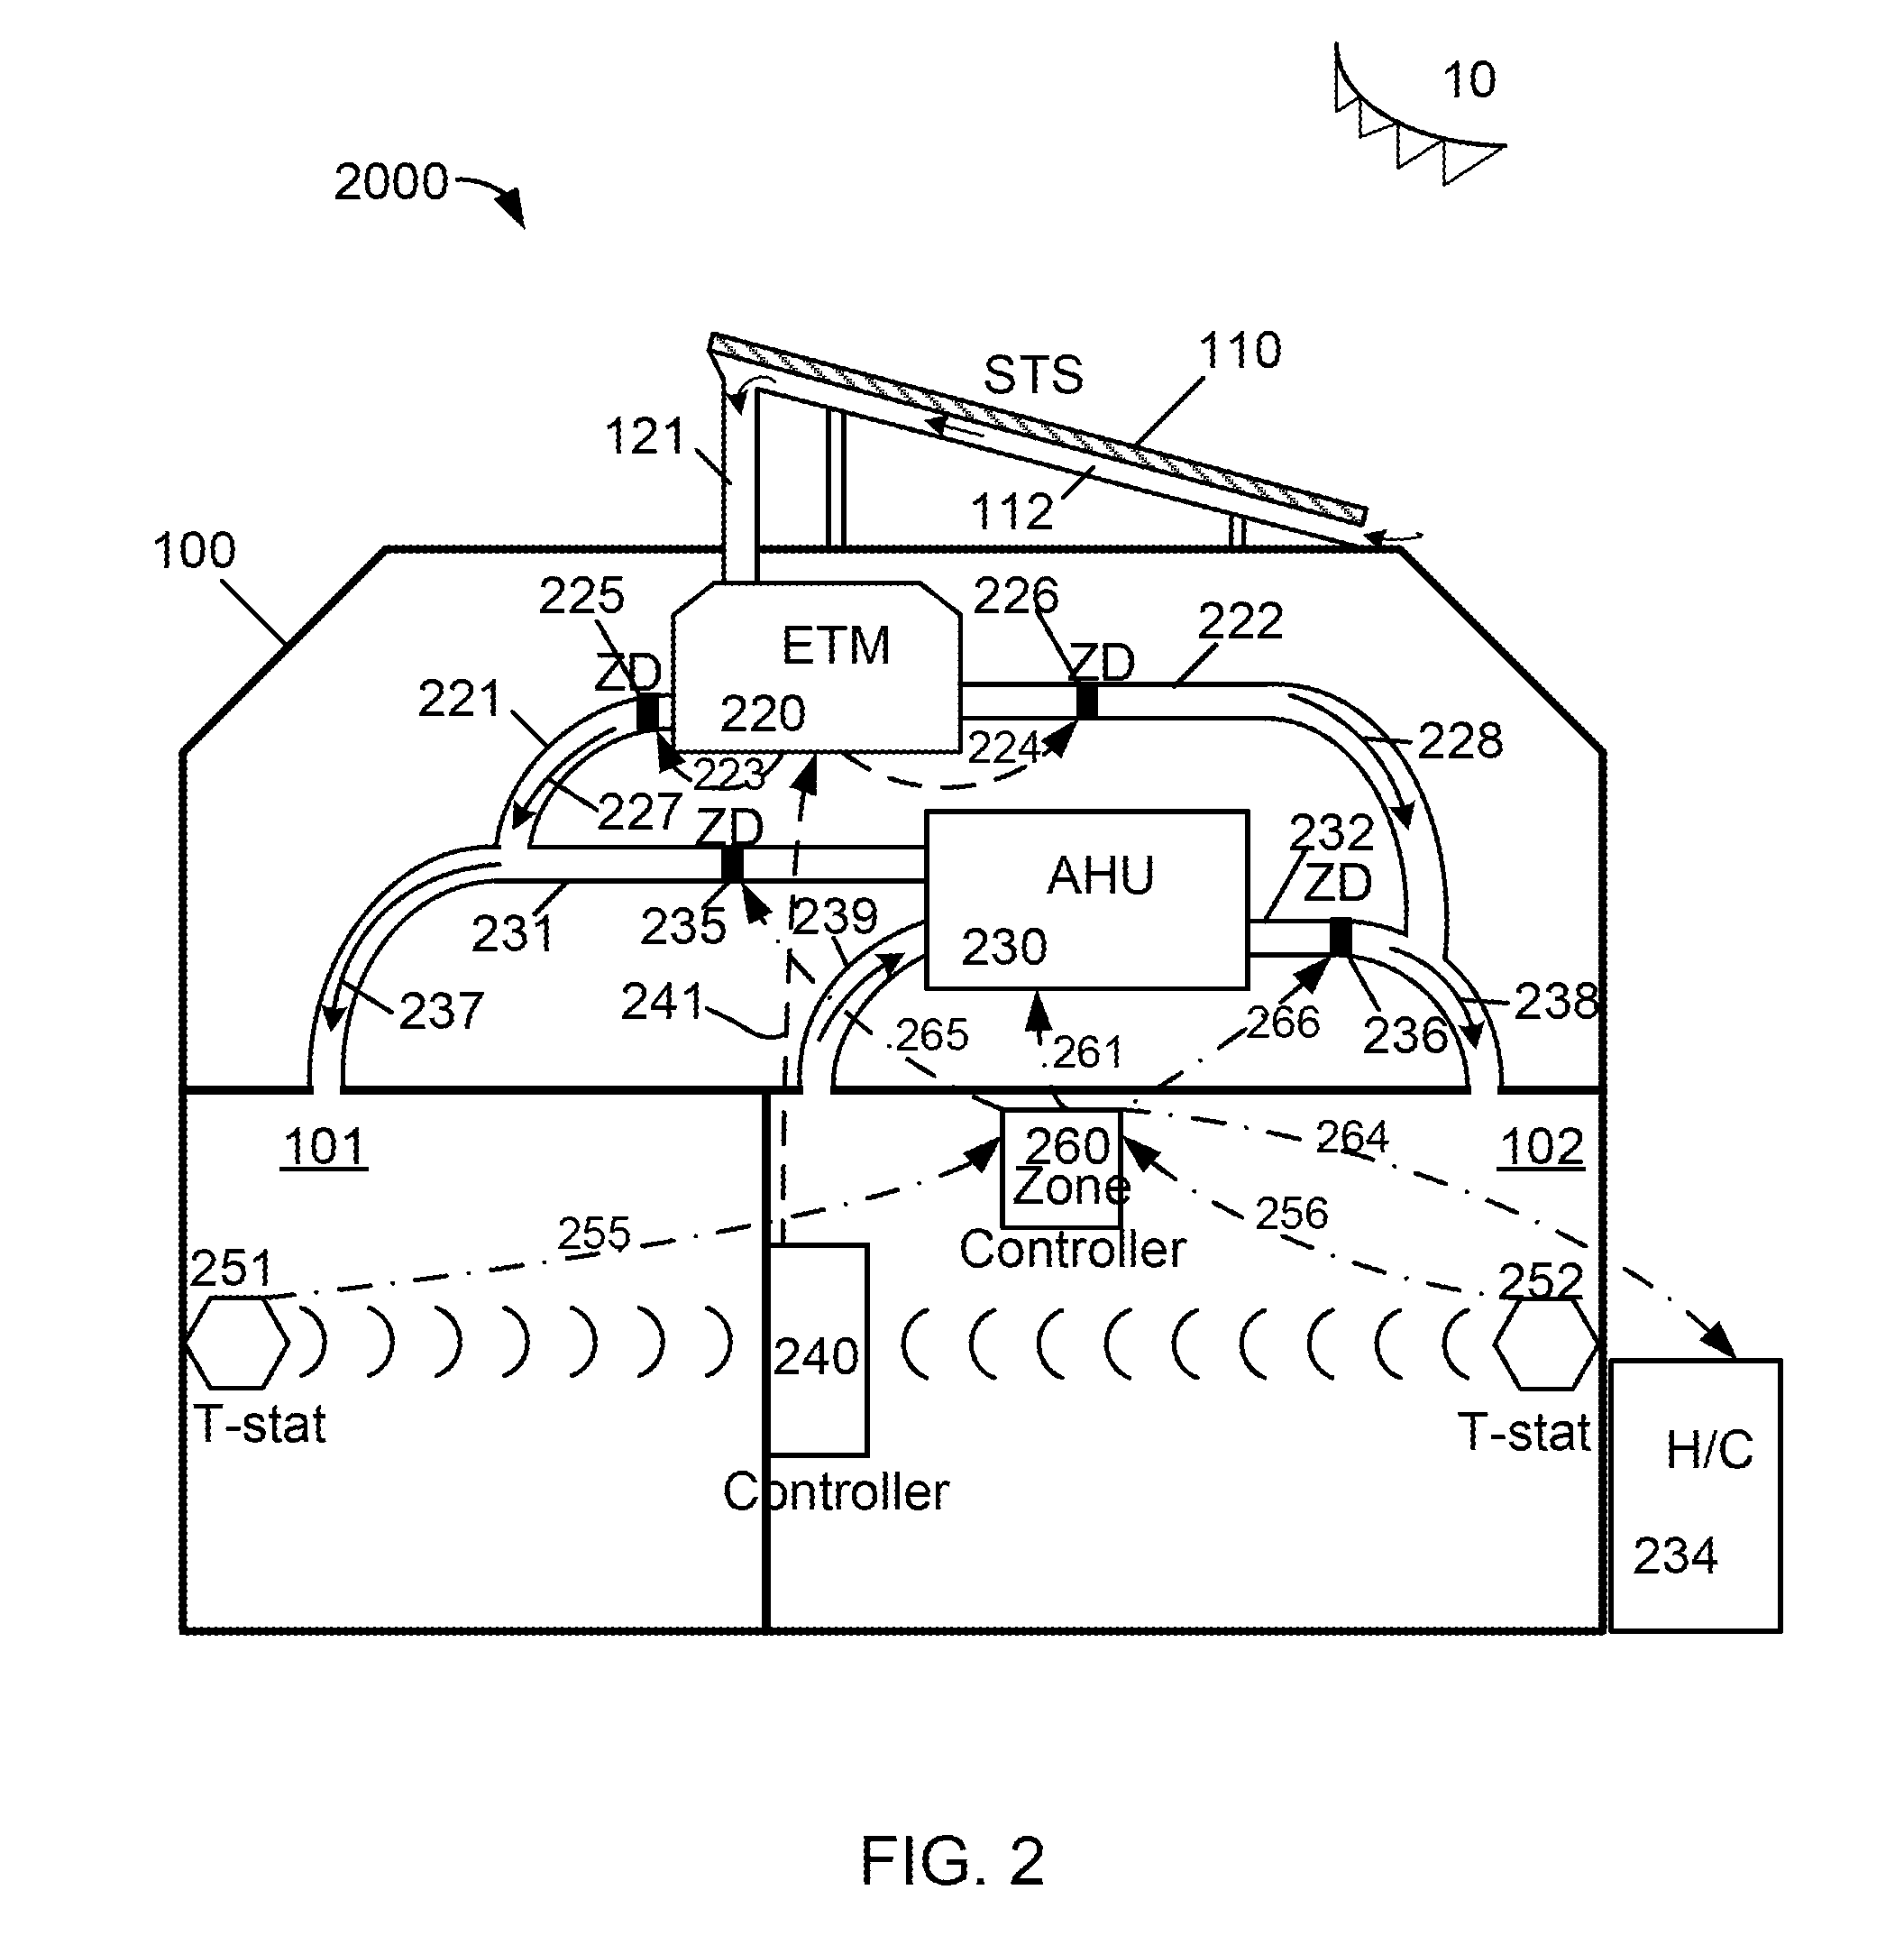 Method and system for healthy home zoning control configured for efficient energy use and conservation of energy resources